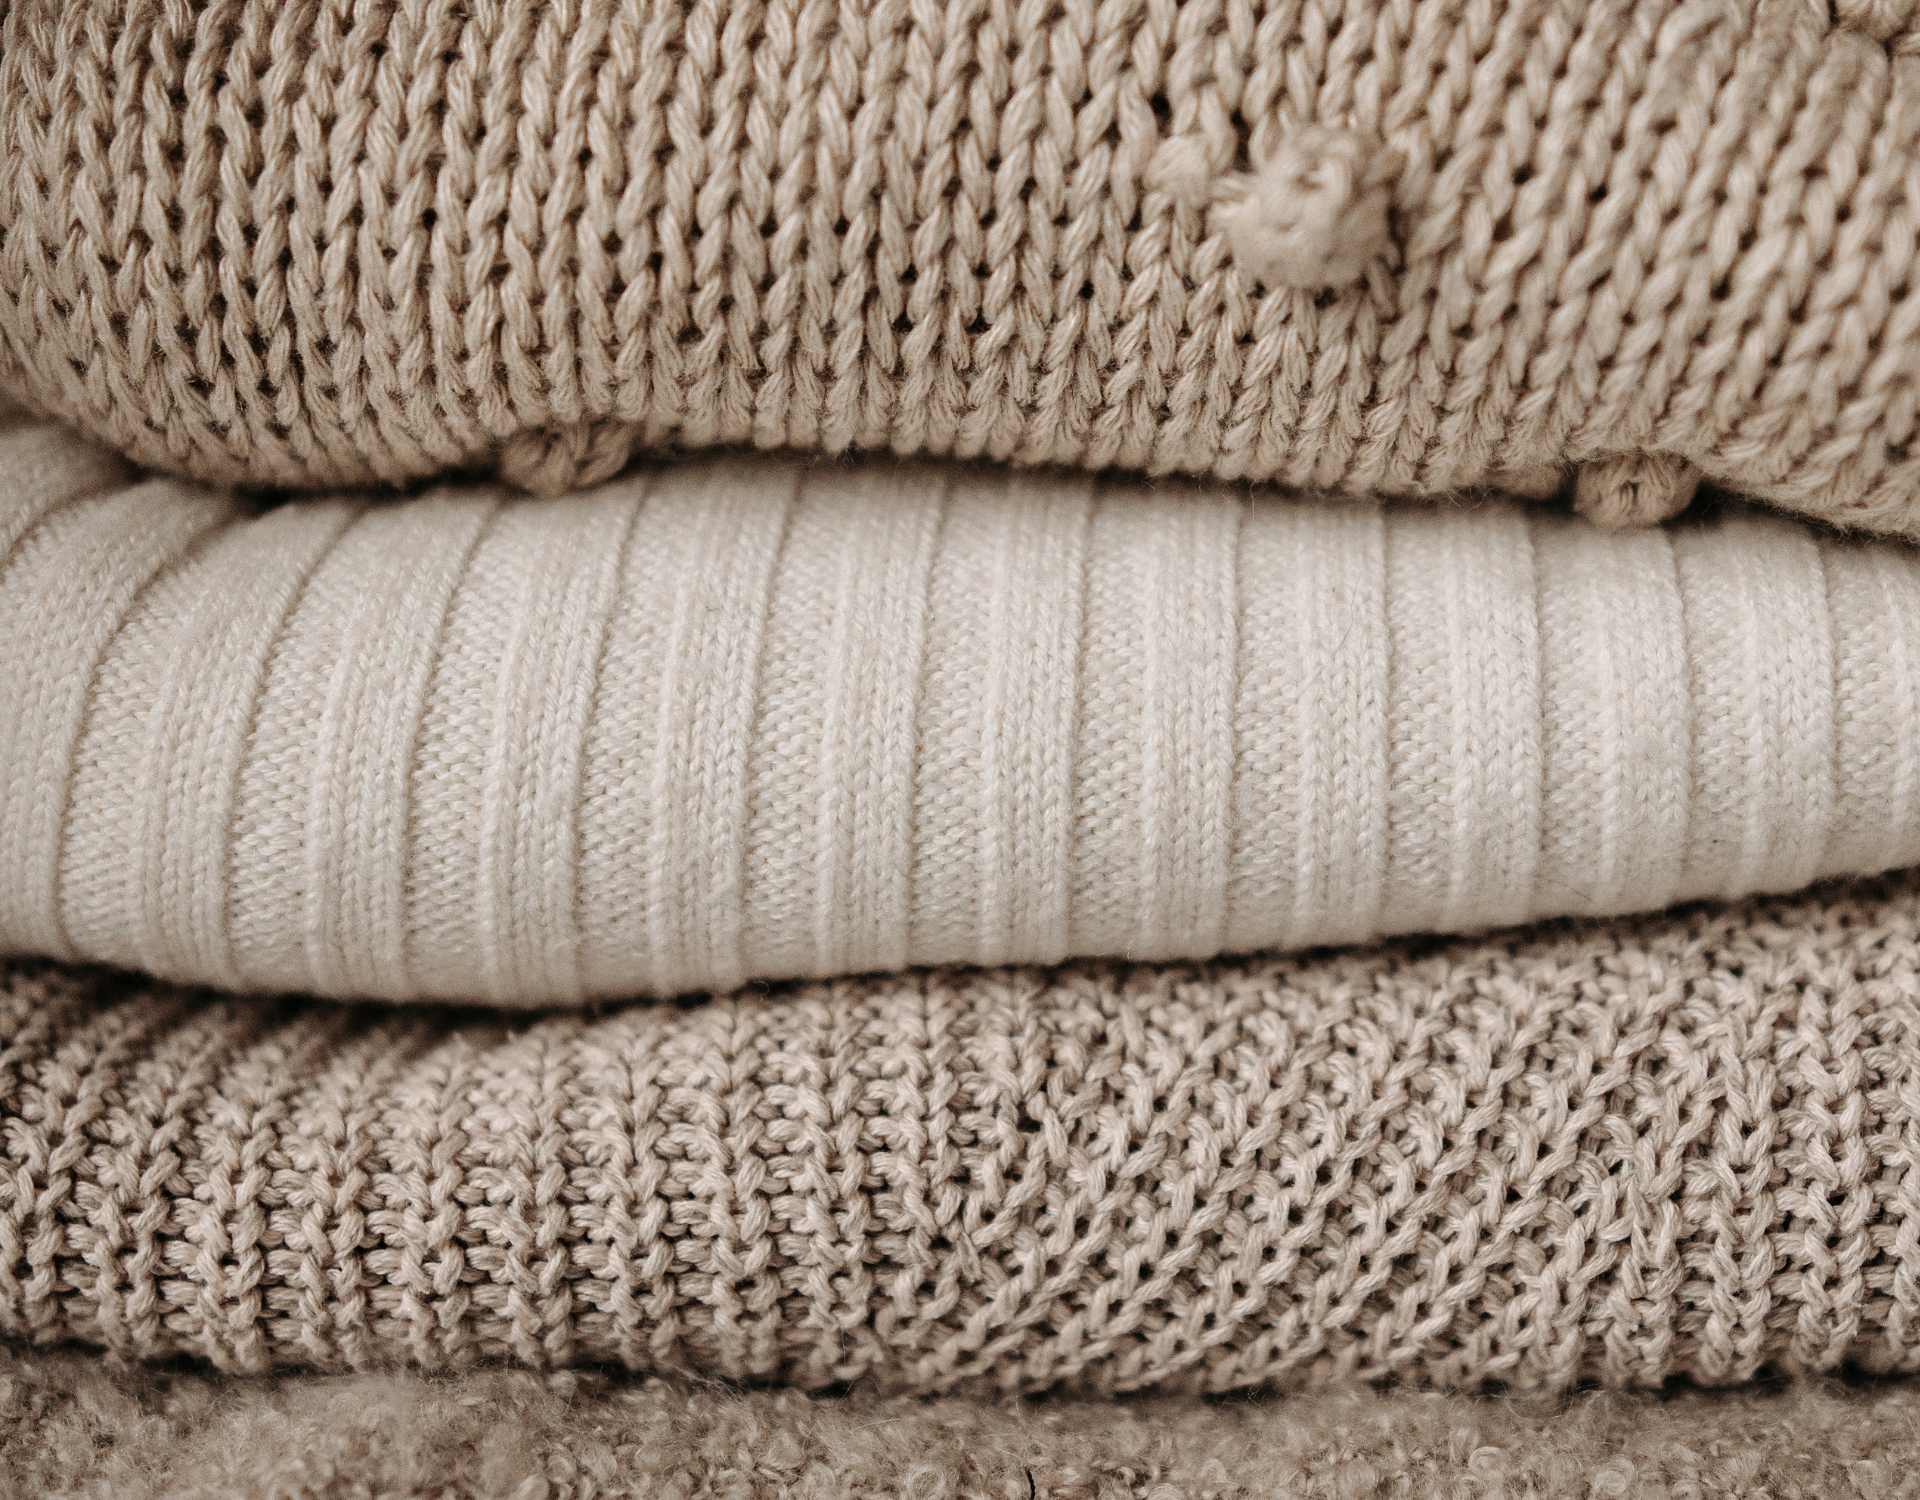 Benefits of Dry Cleaning Your Blankets & Comforters